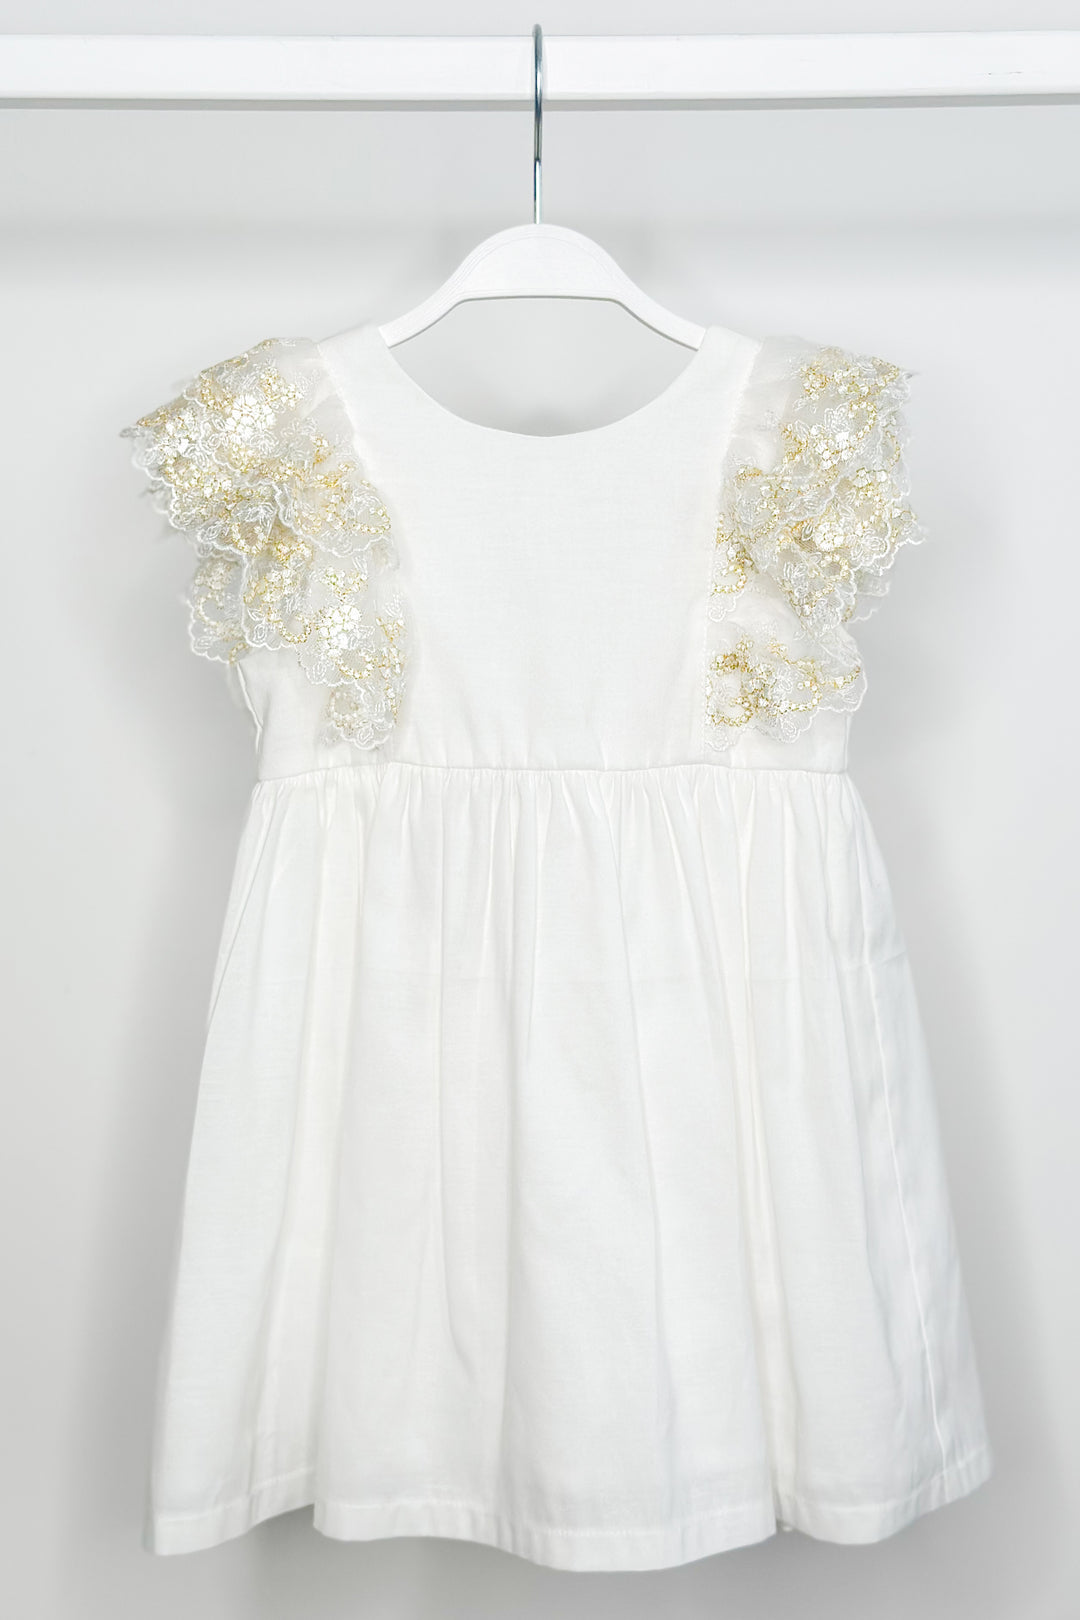 Fofettes "Haven" Ivory Gold Lace Sleeve Dress | Millie and John